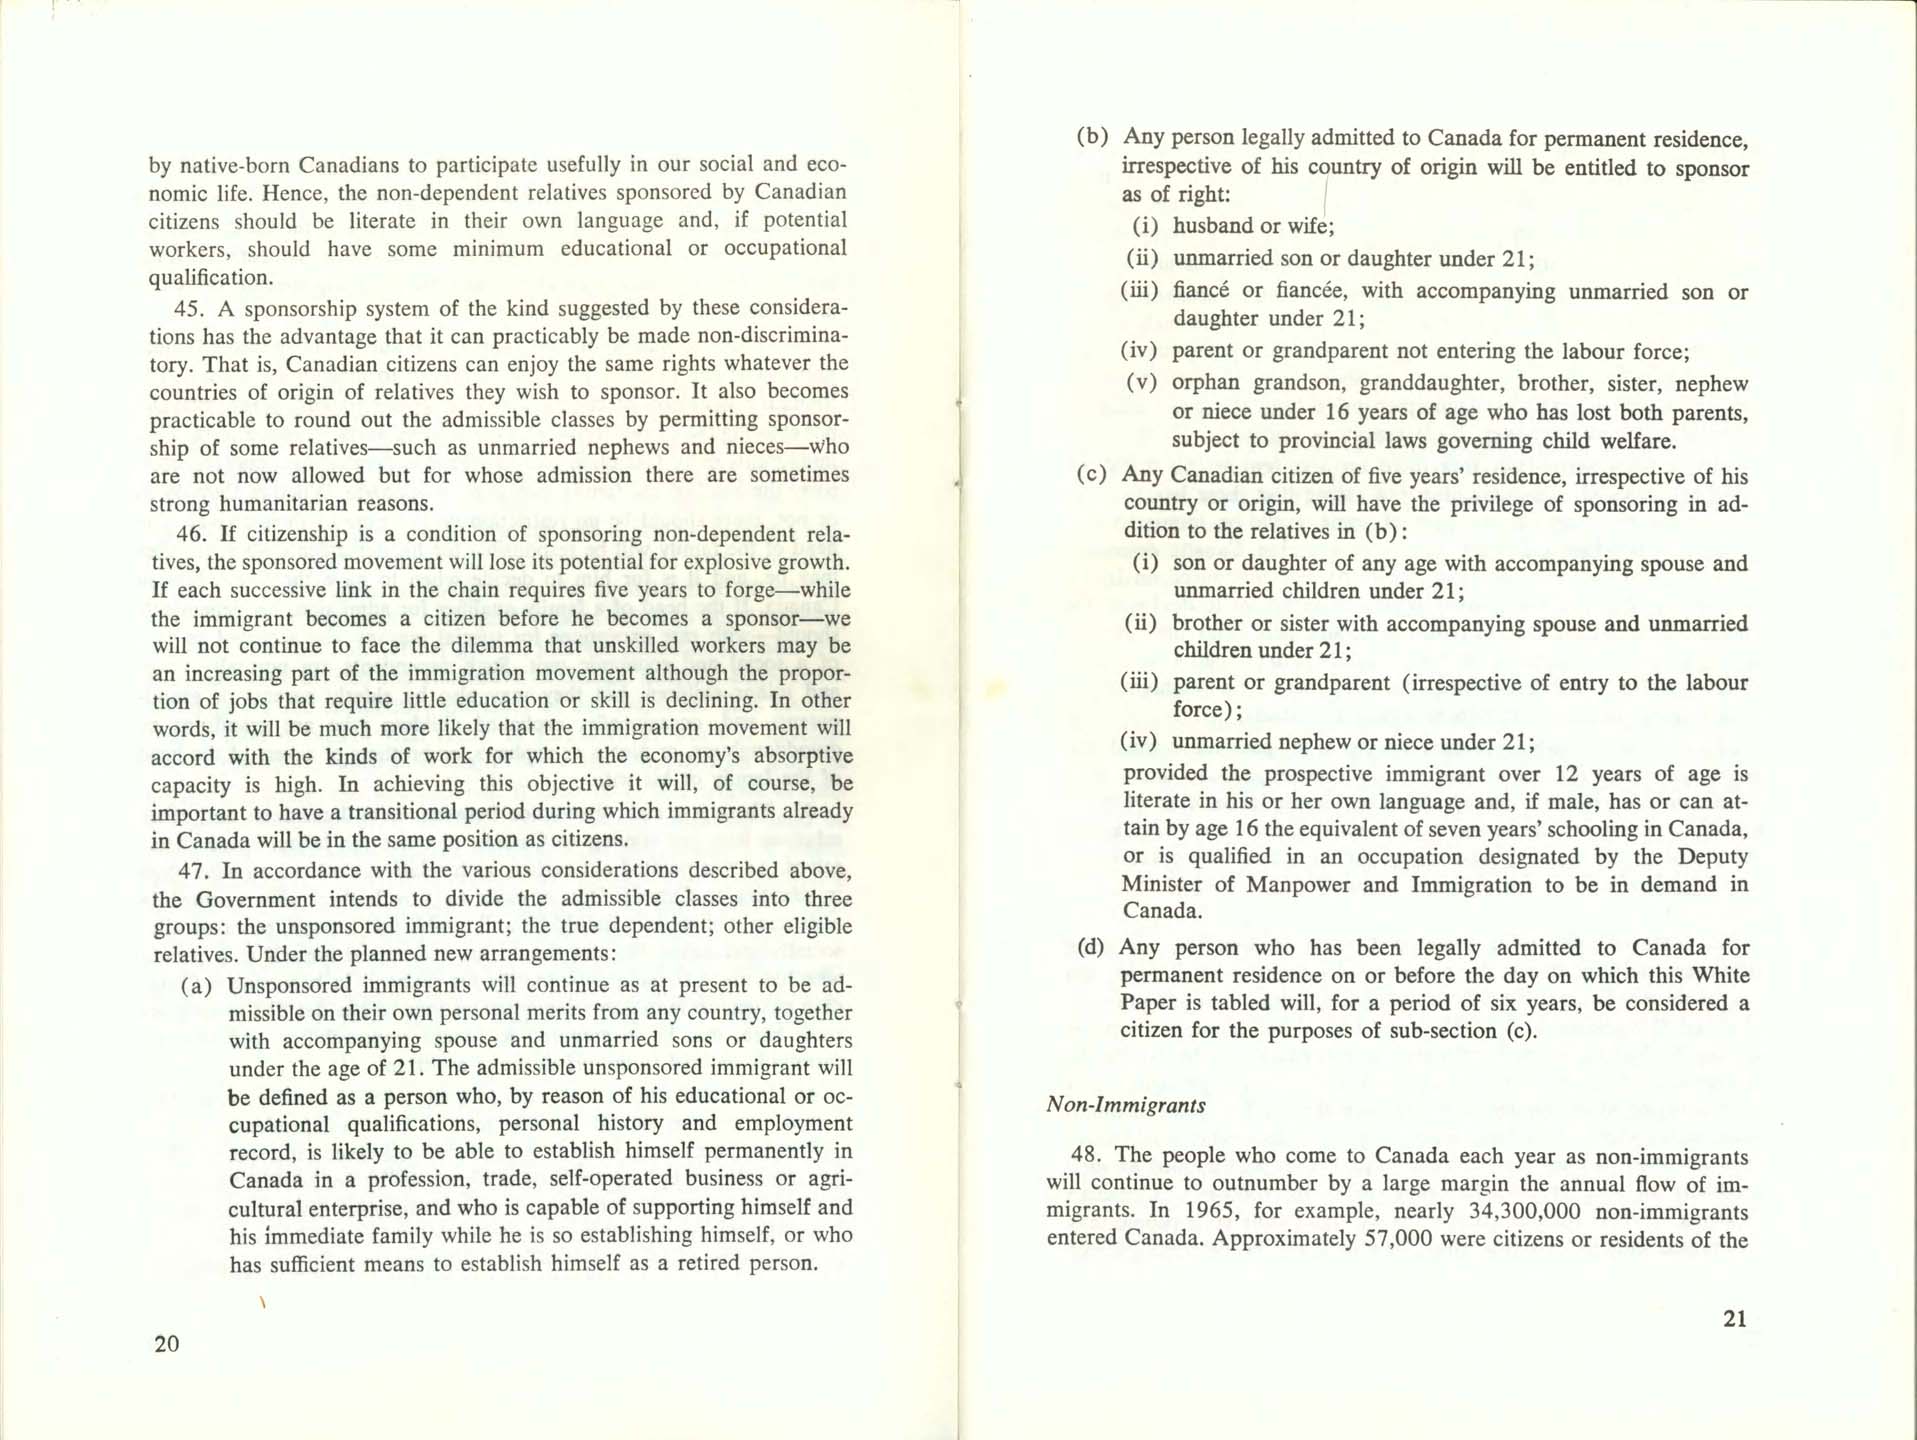 Page 20, 21 White Paper on Immigration, 1966